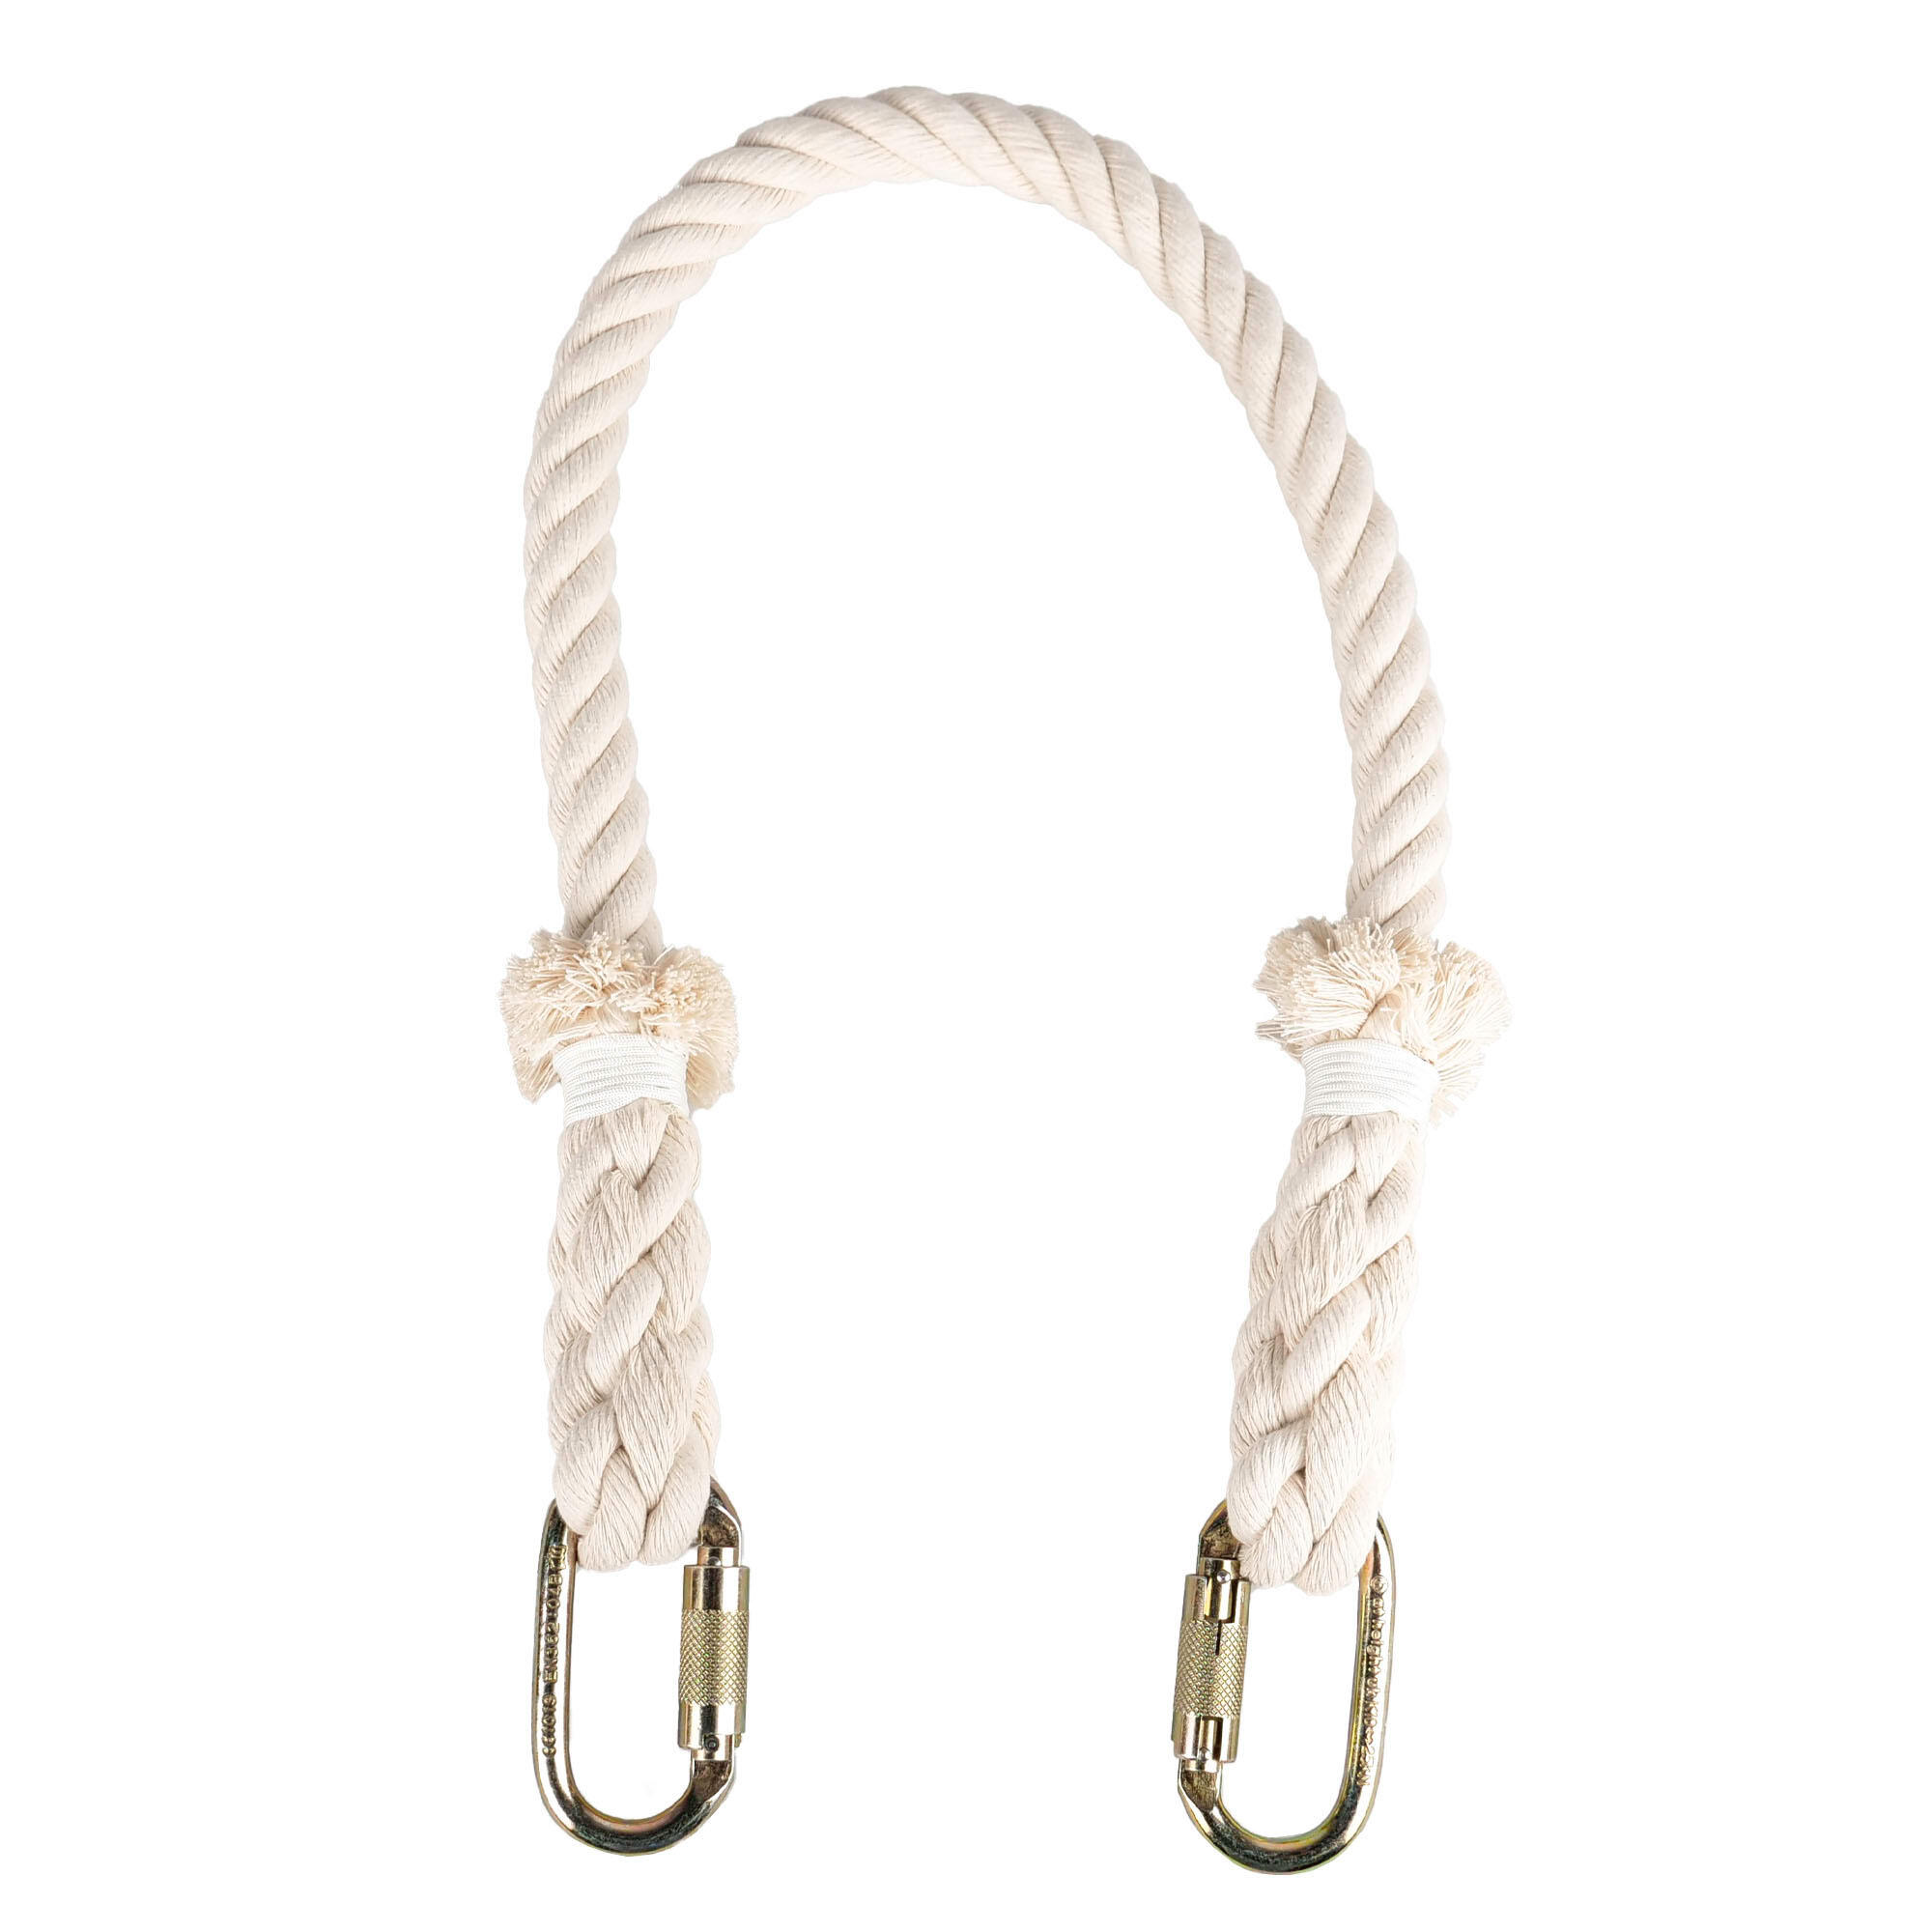 Prodigy Dyna-Core Hanging rope for Aerial Hoop-White 2/5